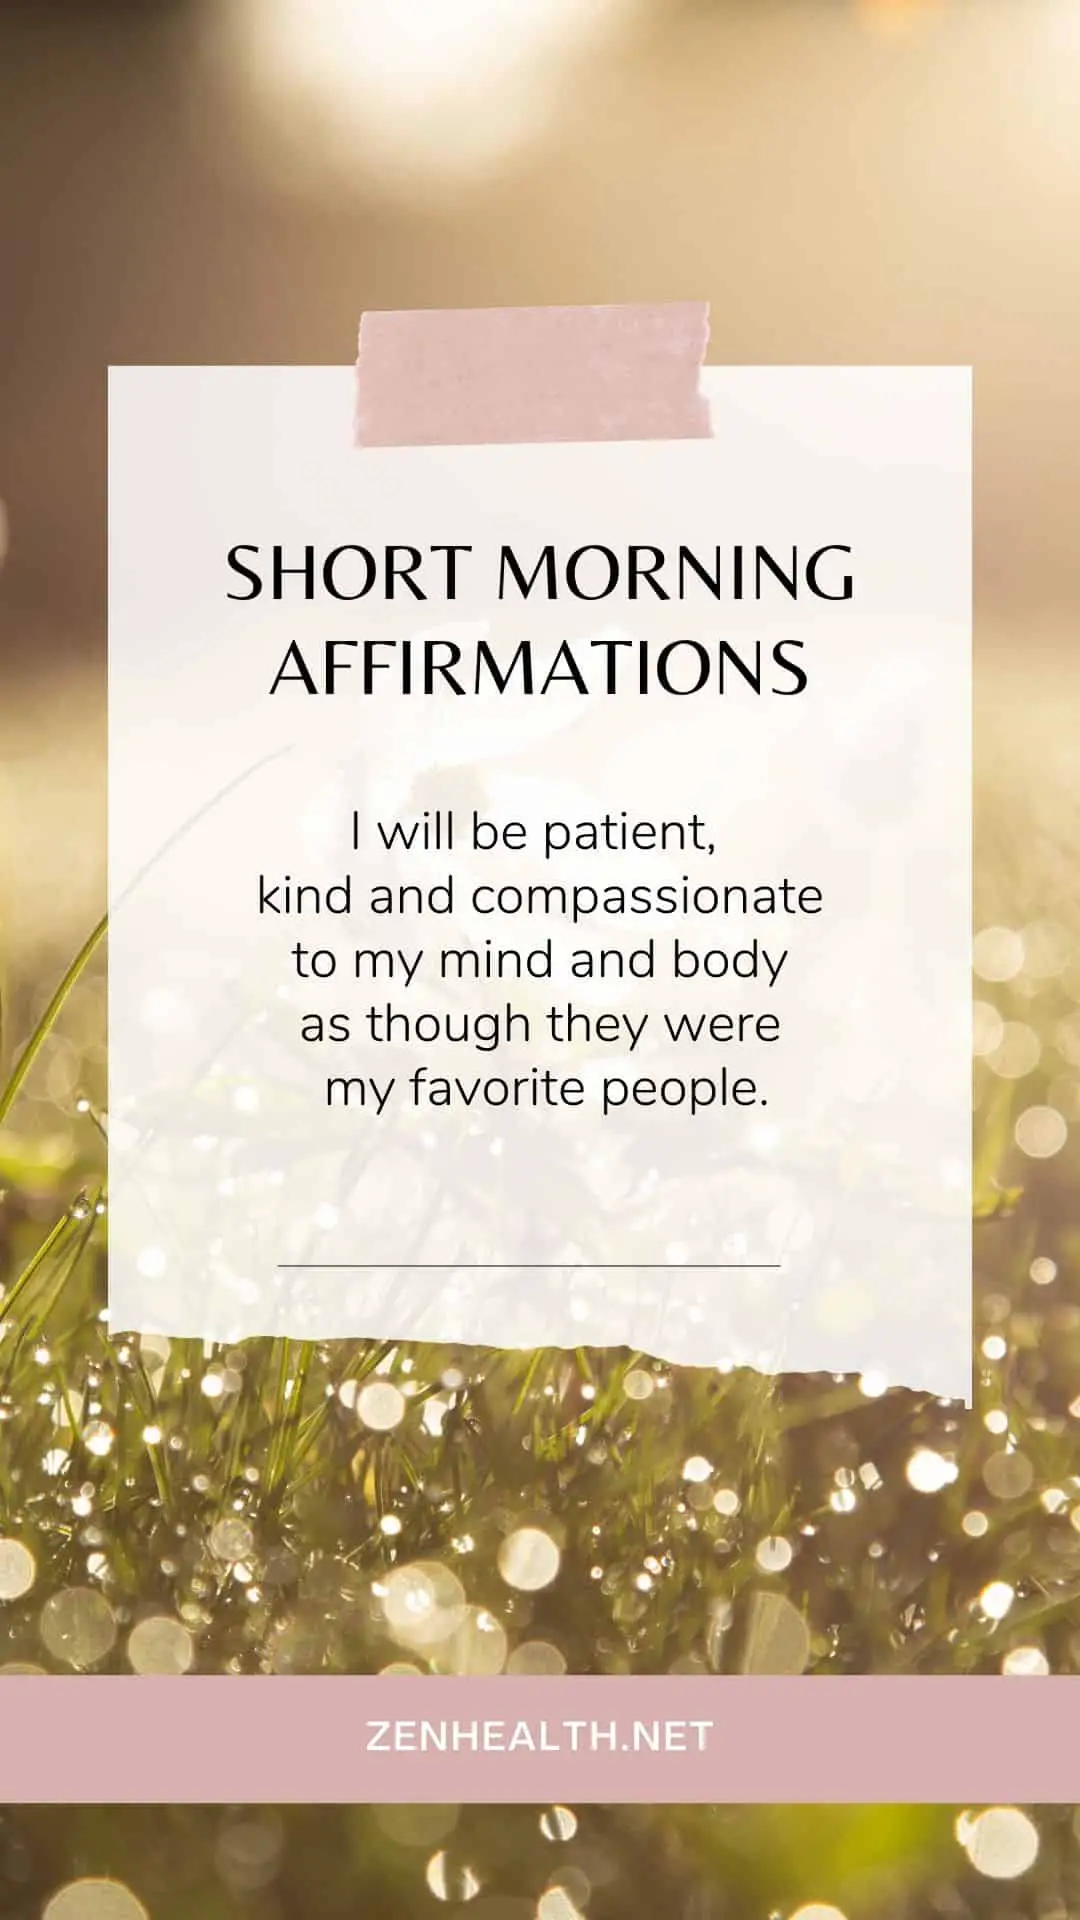 short morning affirmations: I will be patient and kind